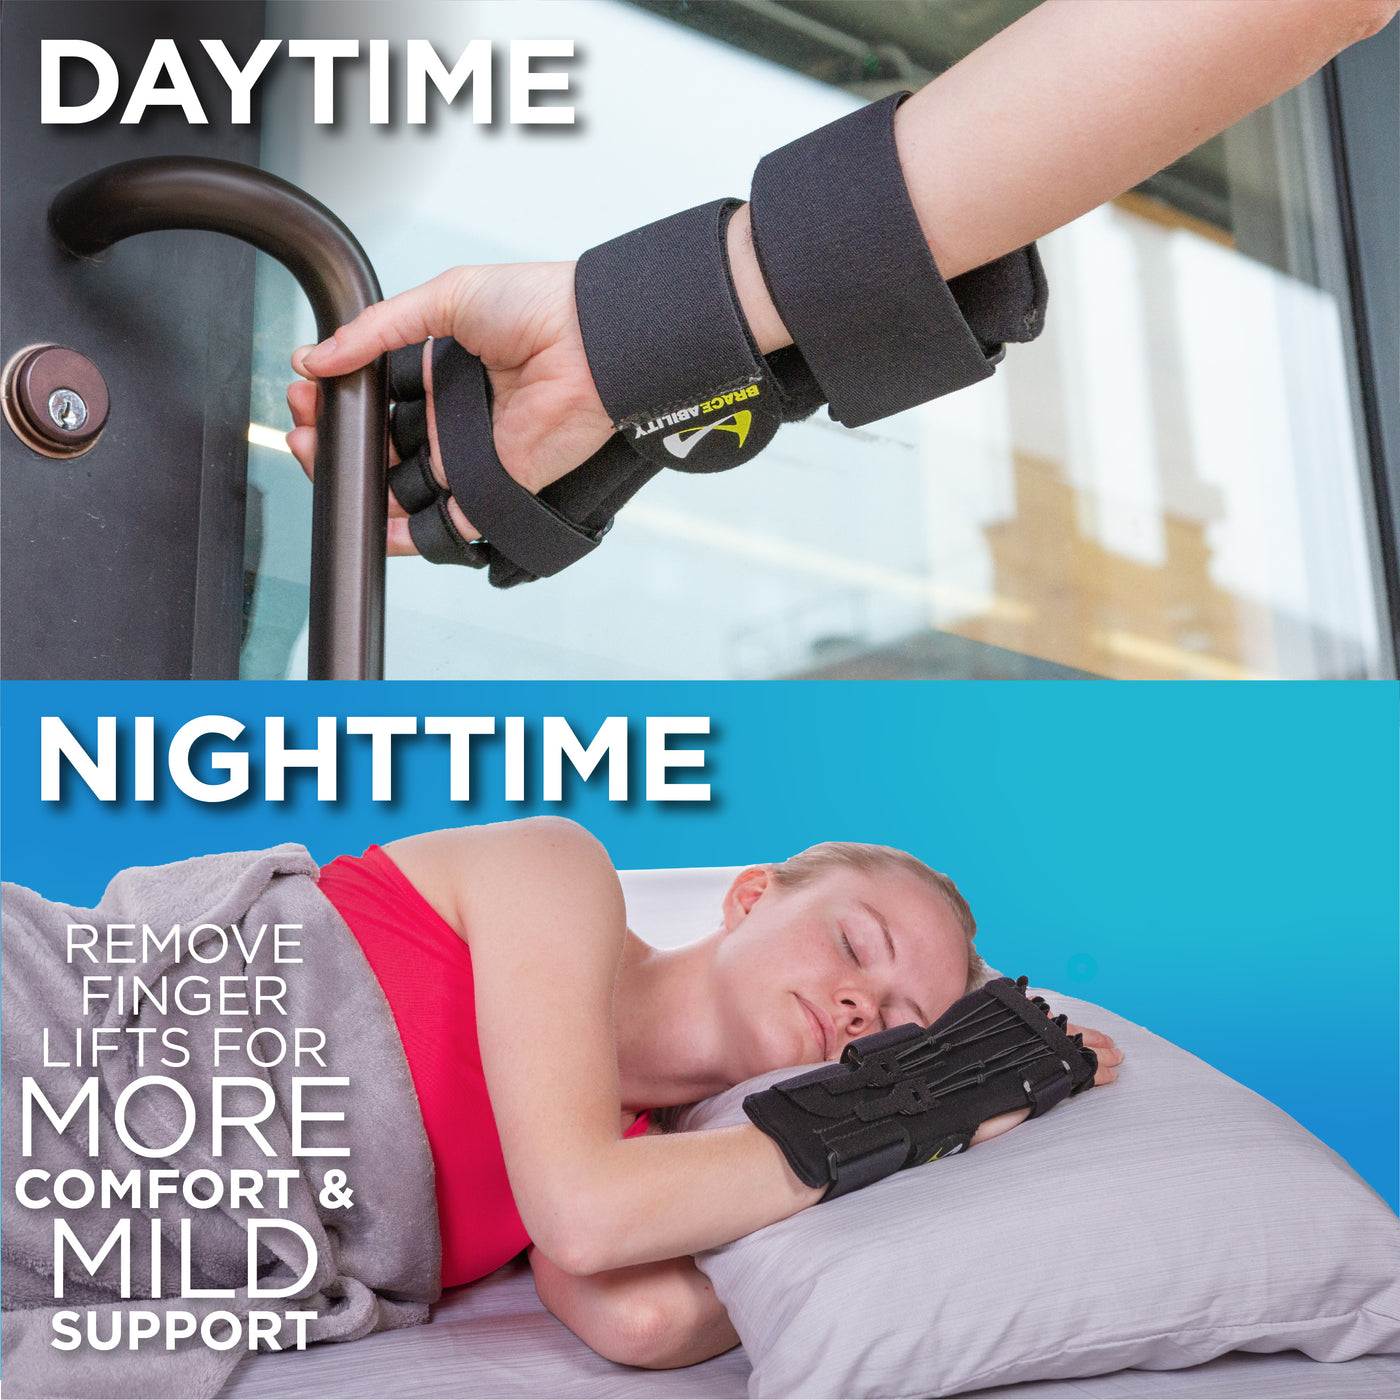 The radial nerve wrist splint can be used during the day or while you sleep